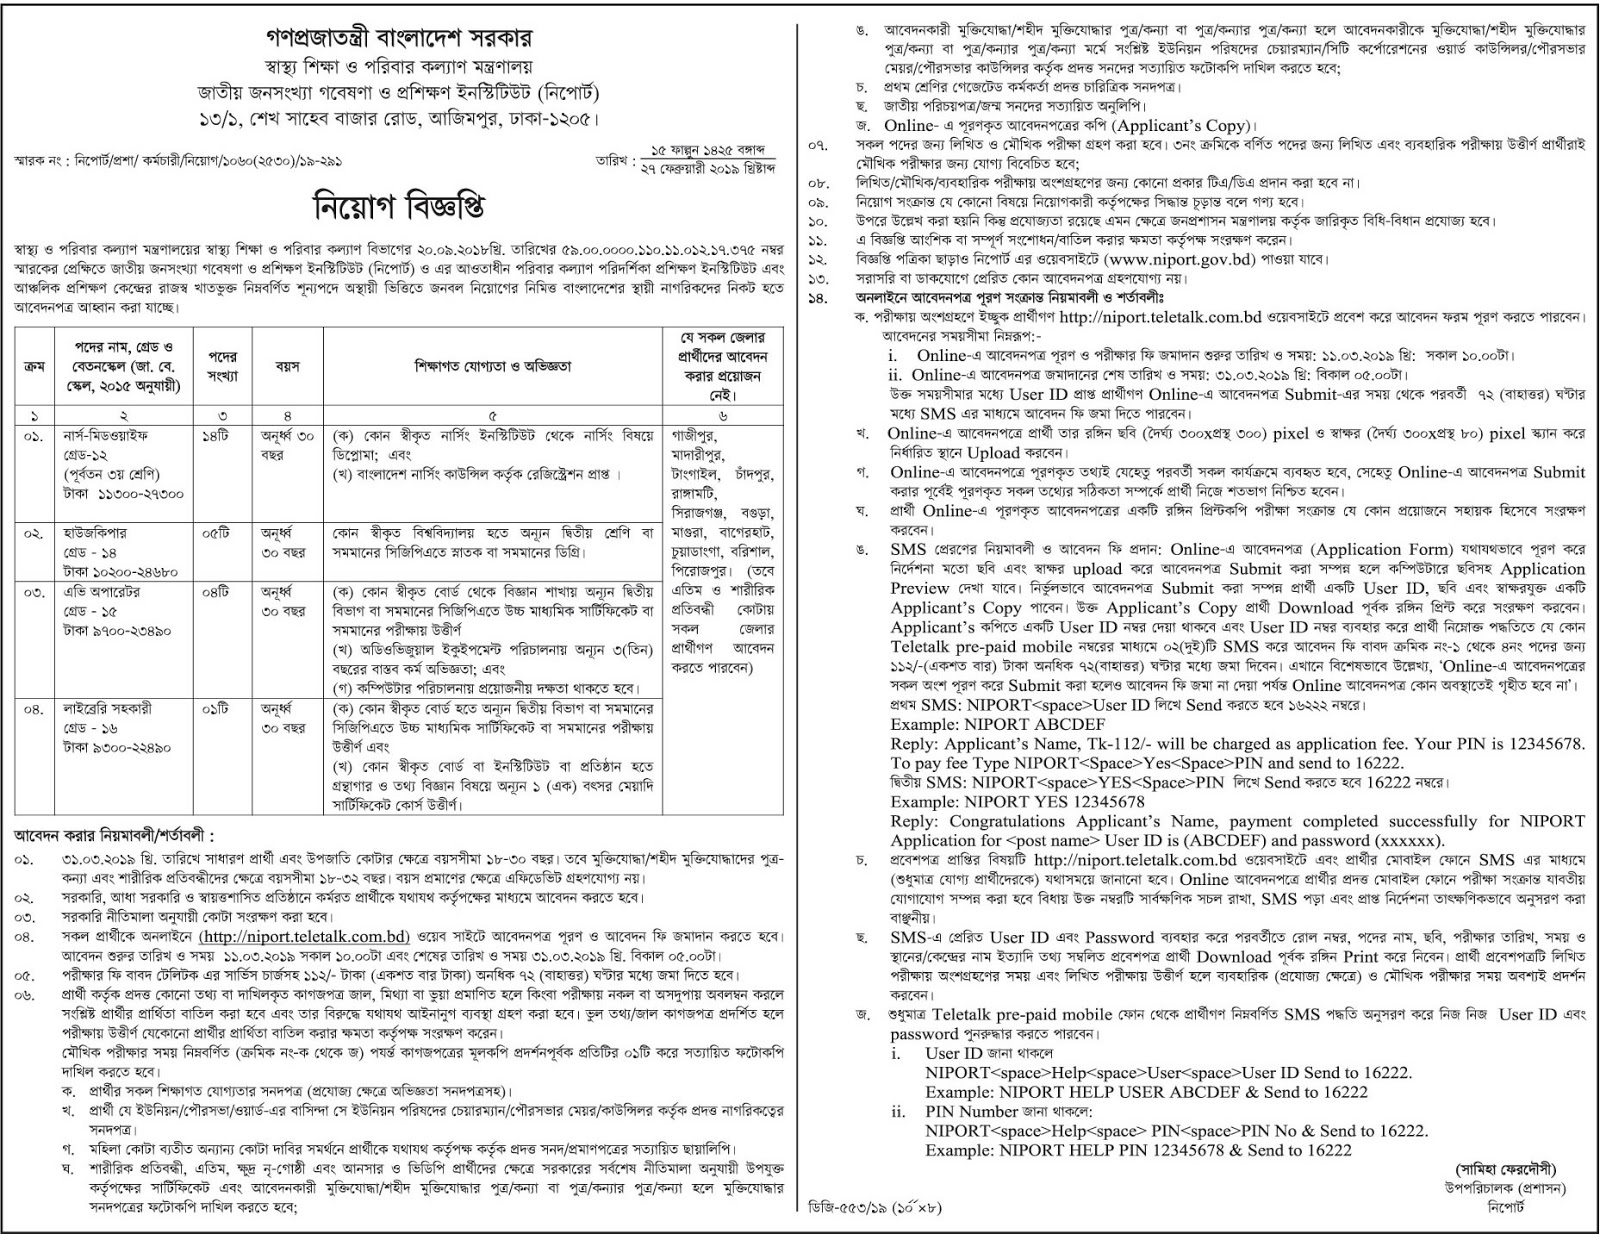 National Institute of Population Research and Training (NIPORT) Job circular 2019 